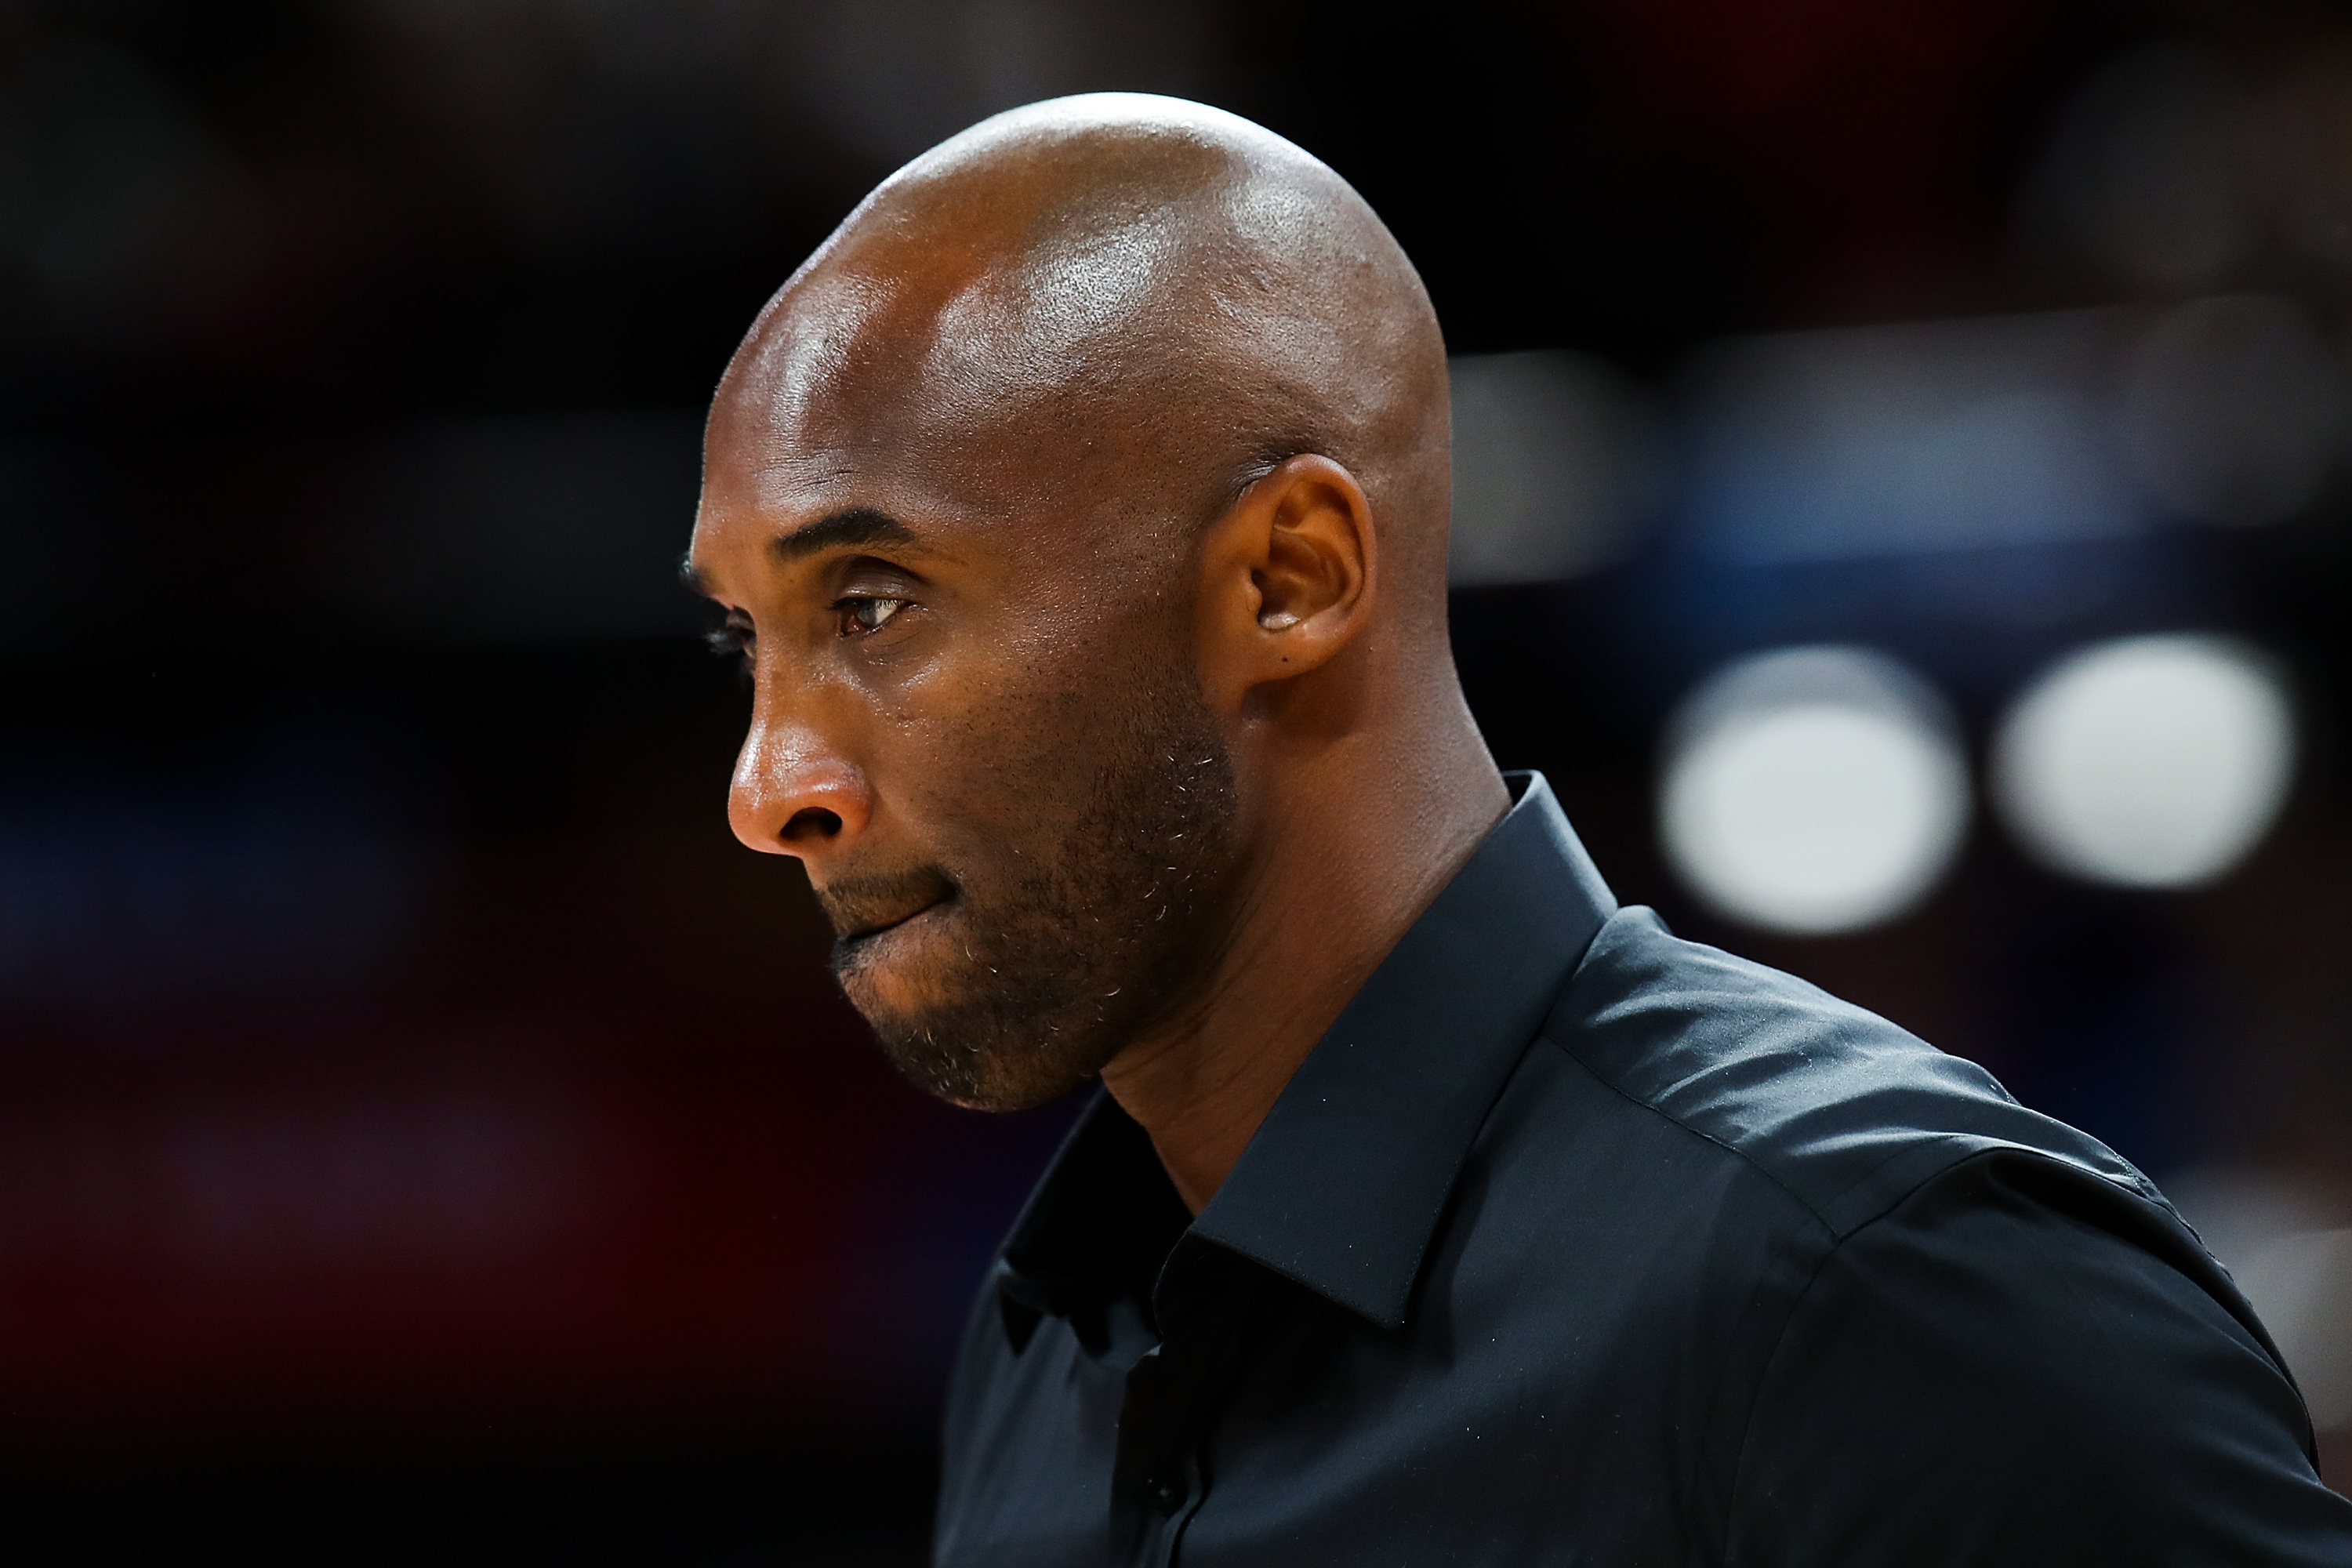 Please be a dream. Kobe can't be gone': Social media reacts